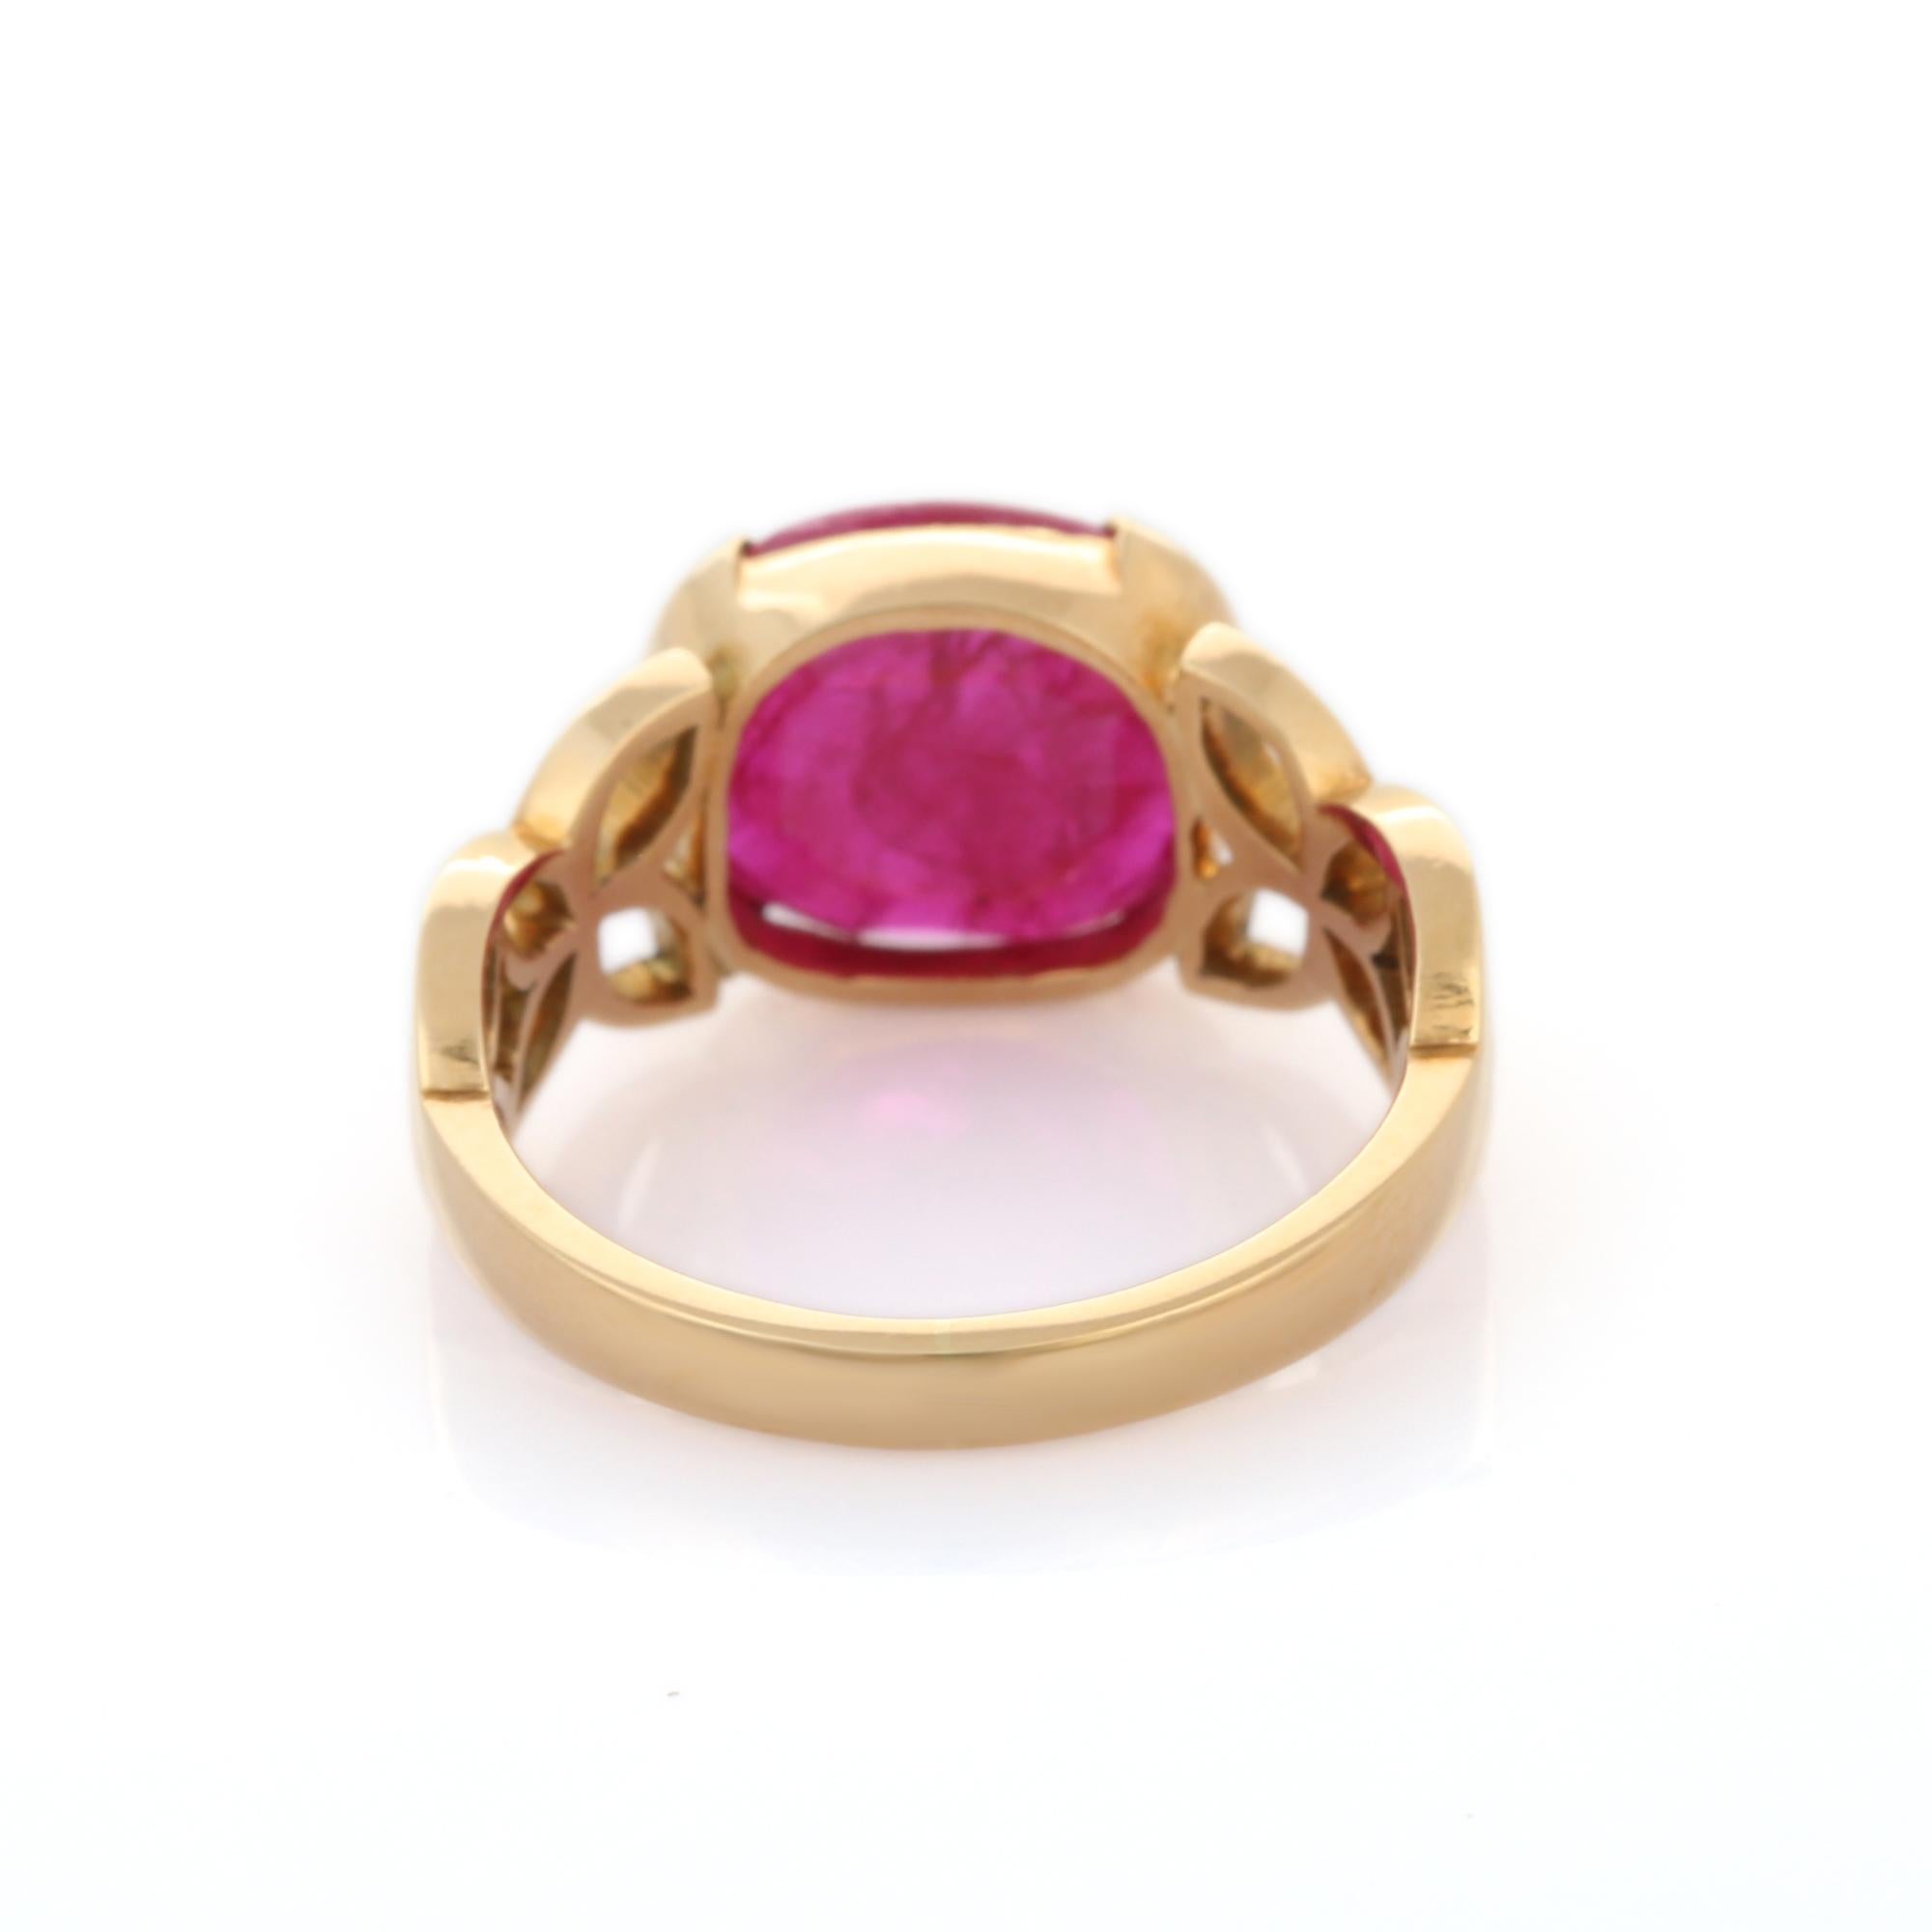 For Sale:  4.6 Carat Ruby Cocktail Ring with Engraving in 18K Solid Yellow Gold 5